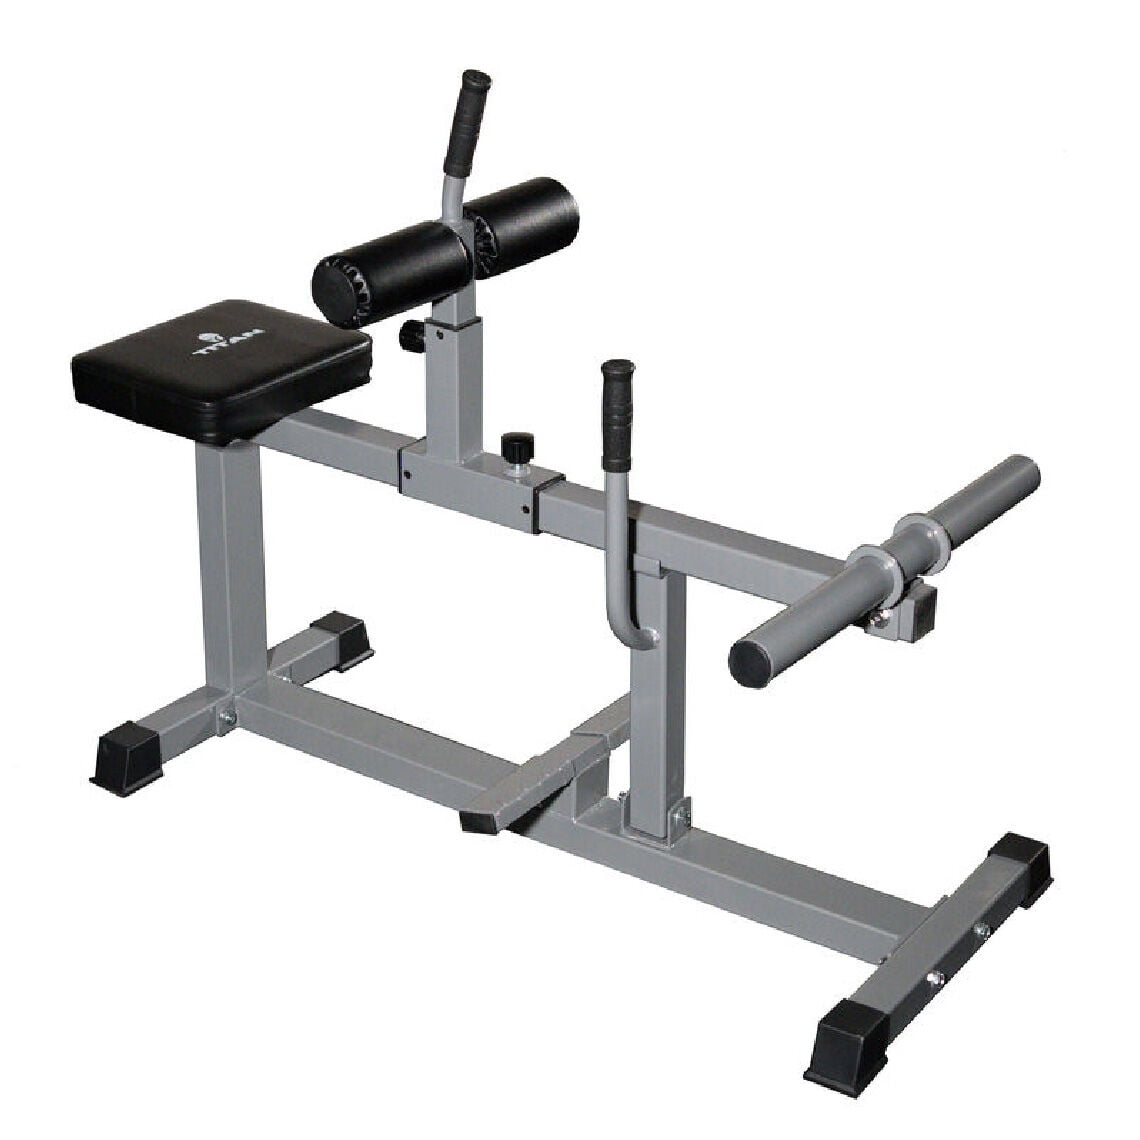 Strength Training Equipment Rated 550 LB Lower Body Specialty Machine Titan Fitness Plate-Loaded Seated Calf Raise Machine 